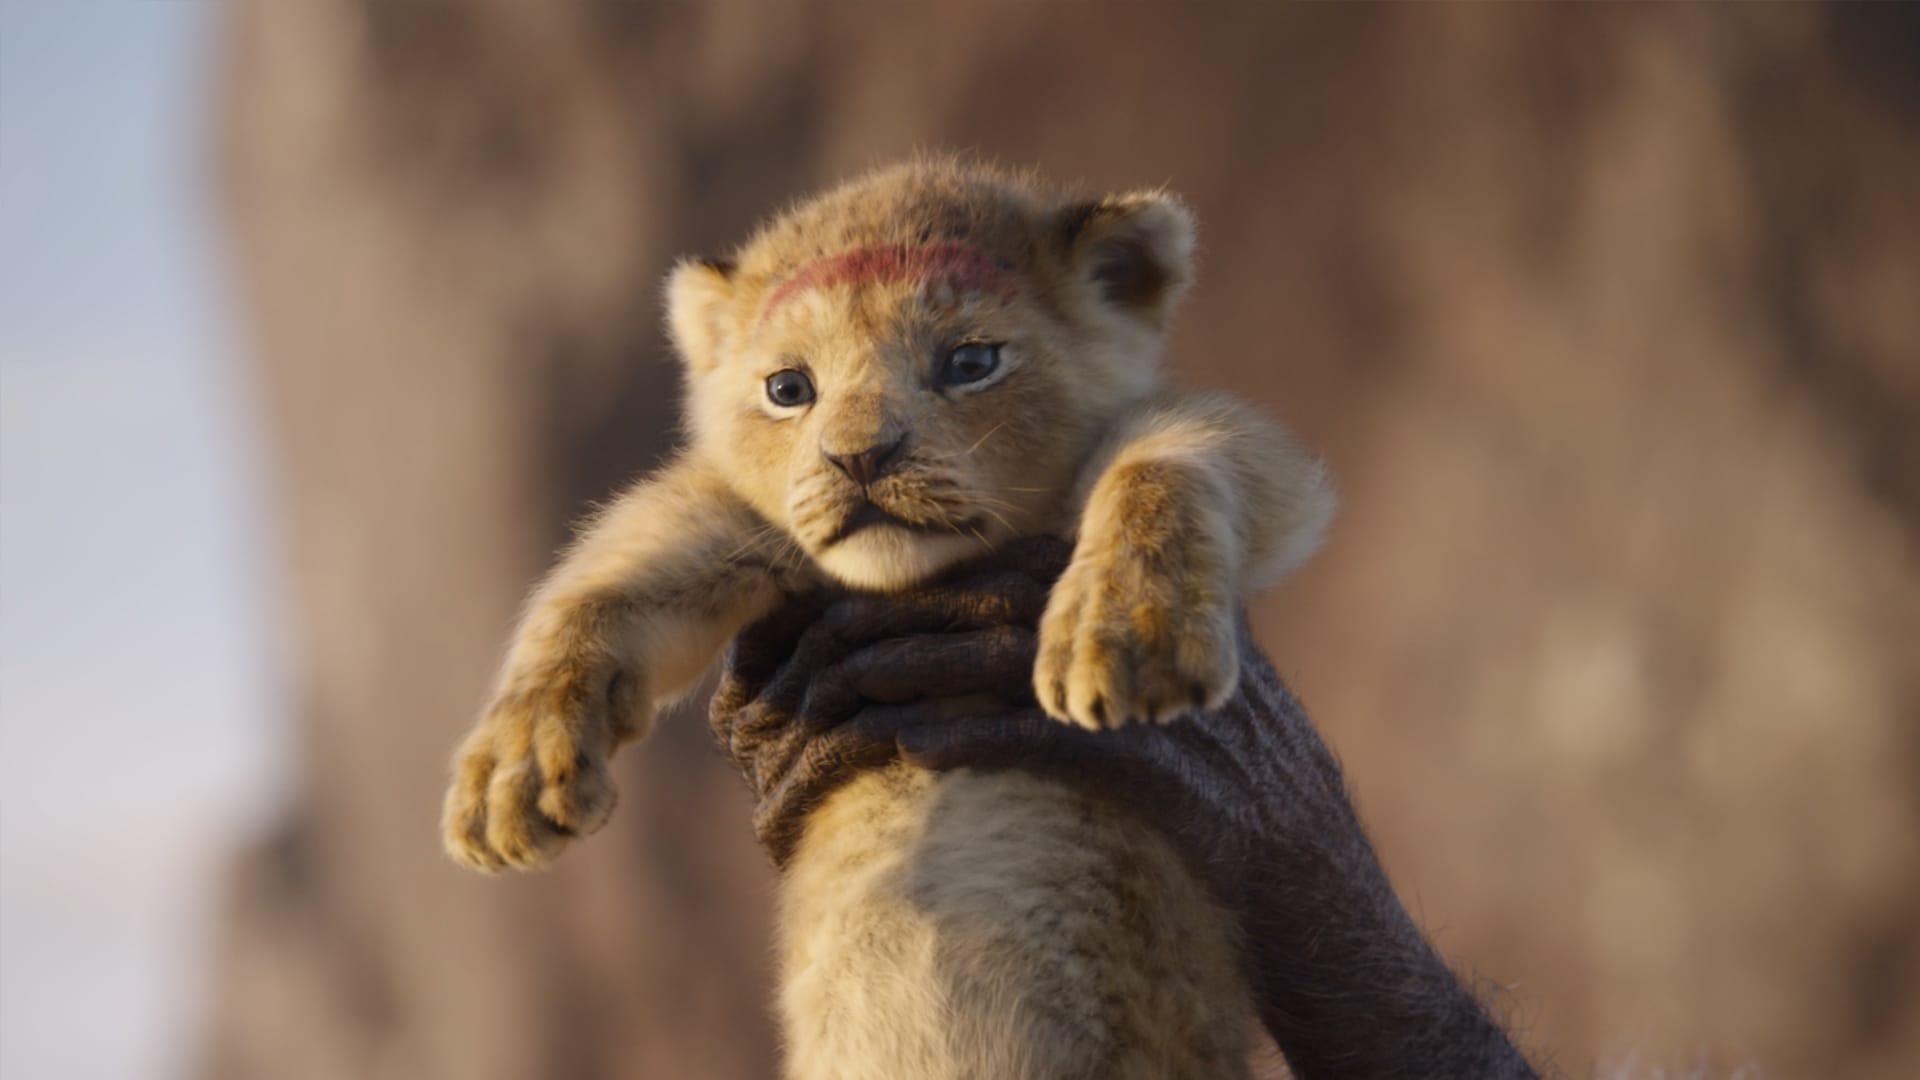 The Lion King Reviews Round Up: Critics Say Timon And Pumbaa Steal